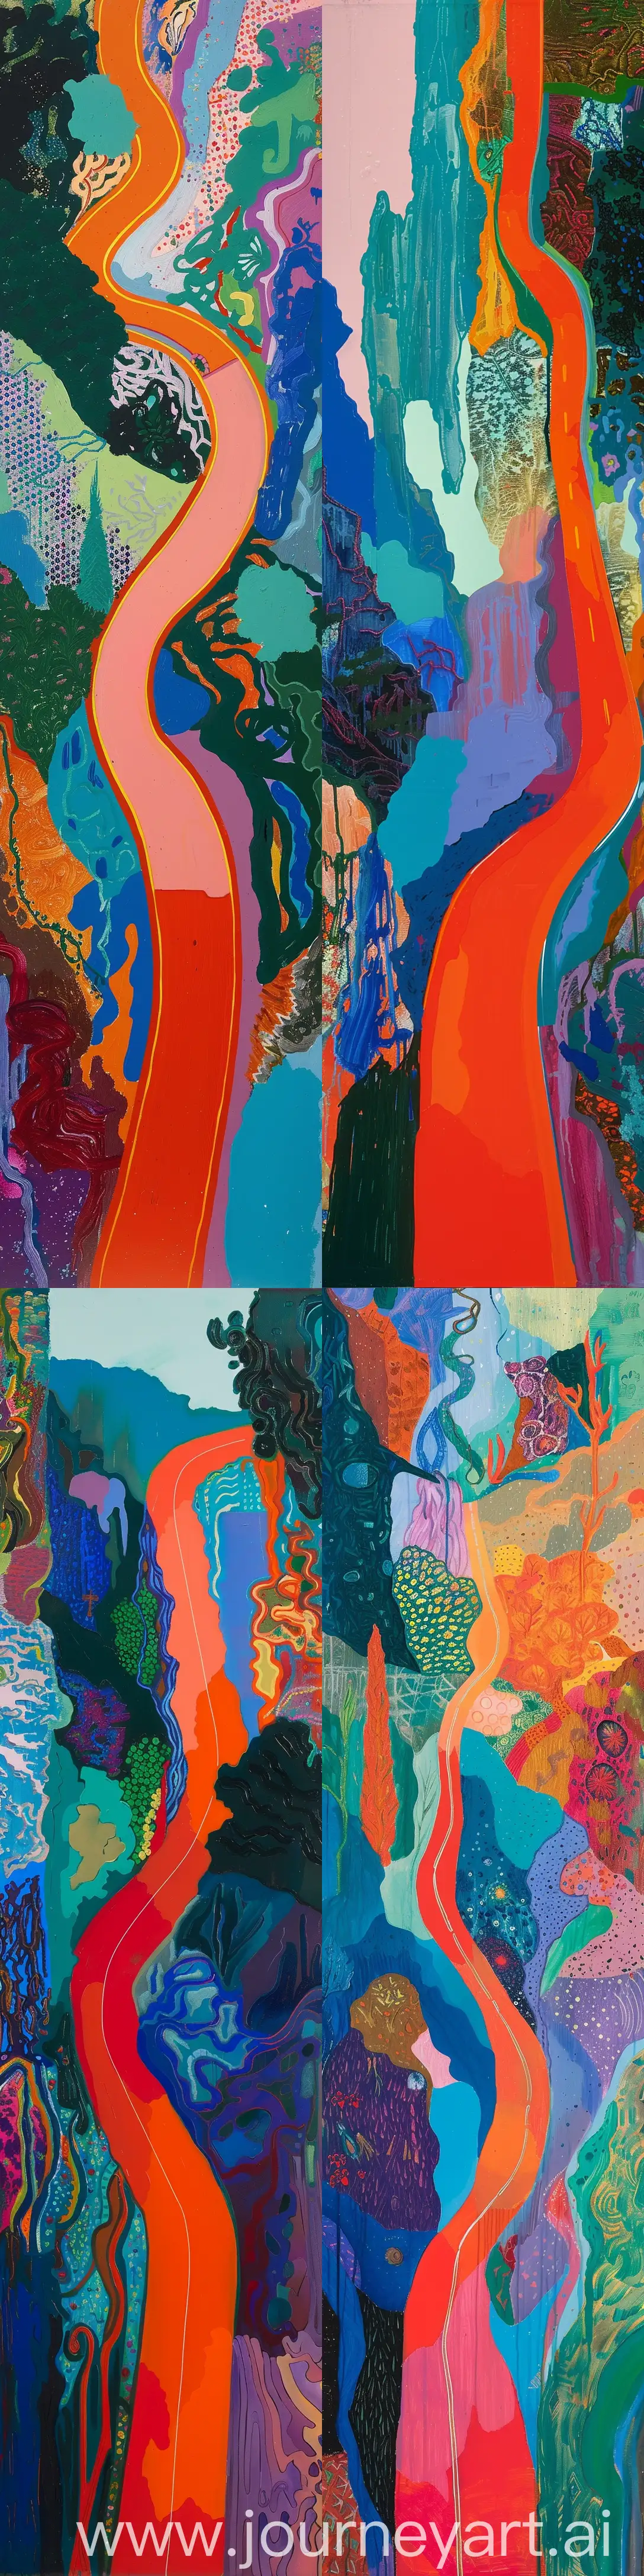 Vibrant-and-Colorful-Mulholland-Drive-Acrylic-Painting-1980